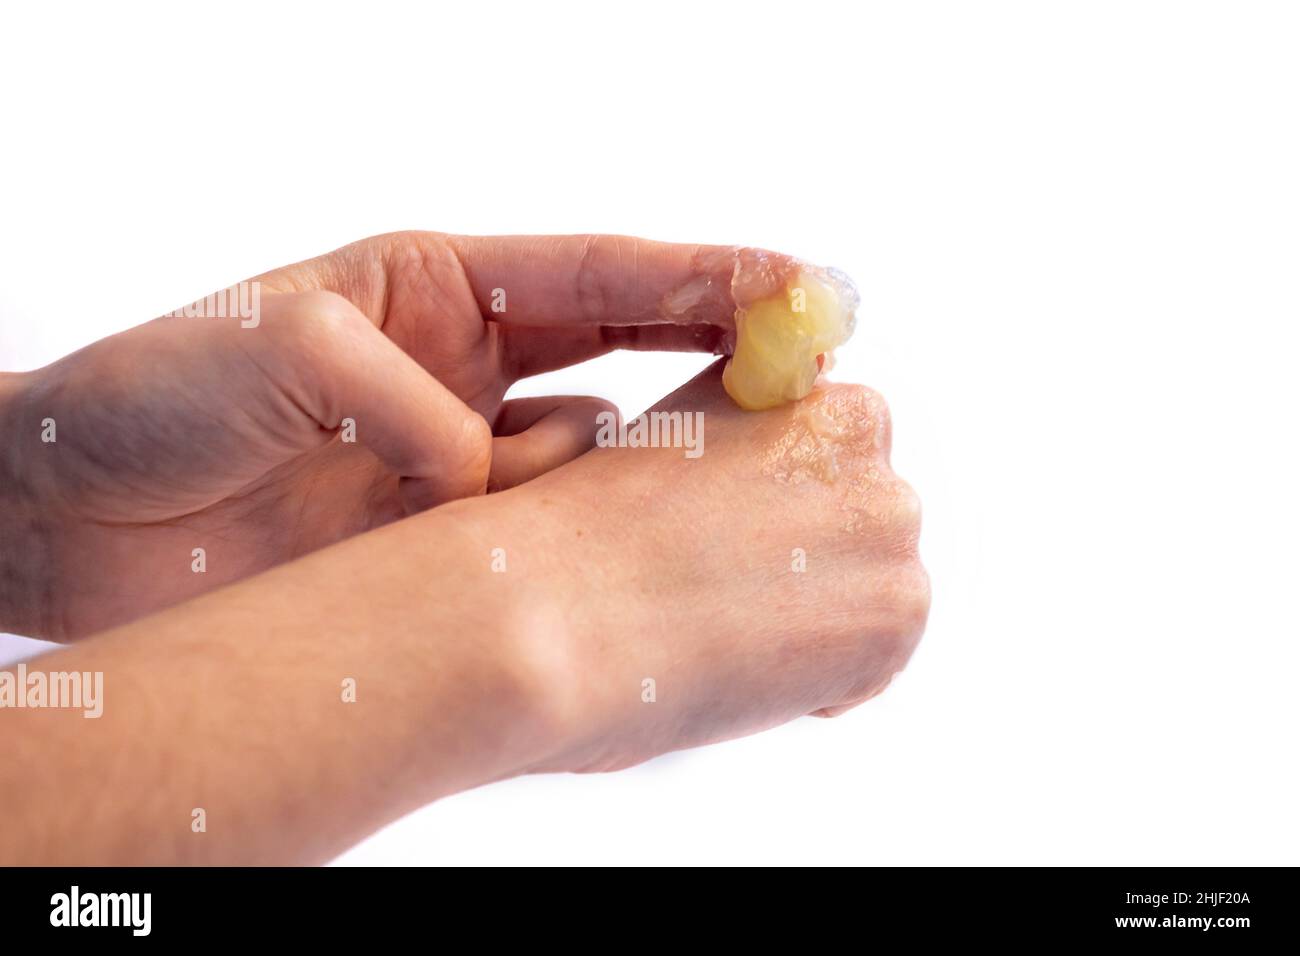 Woman applying petroleum jelly on her hand isolated on white background. Young girl doing skincare with moisturizing cream. Stock Photo